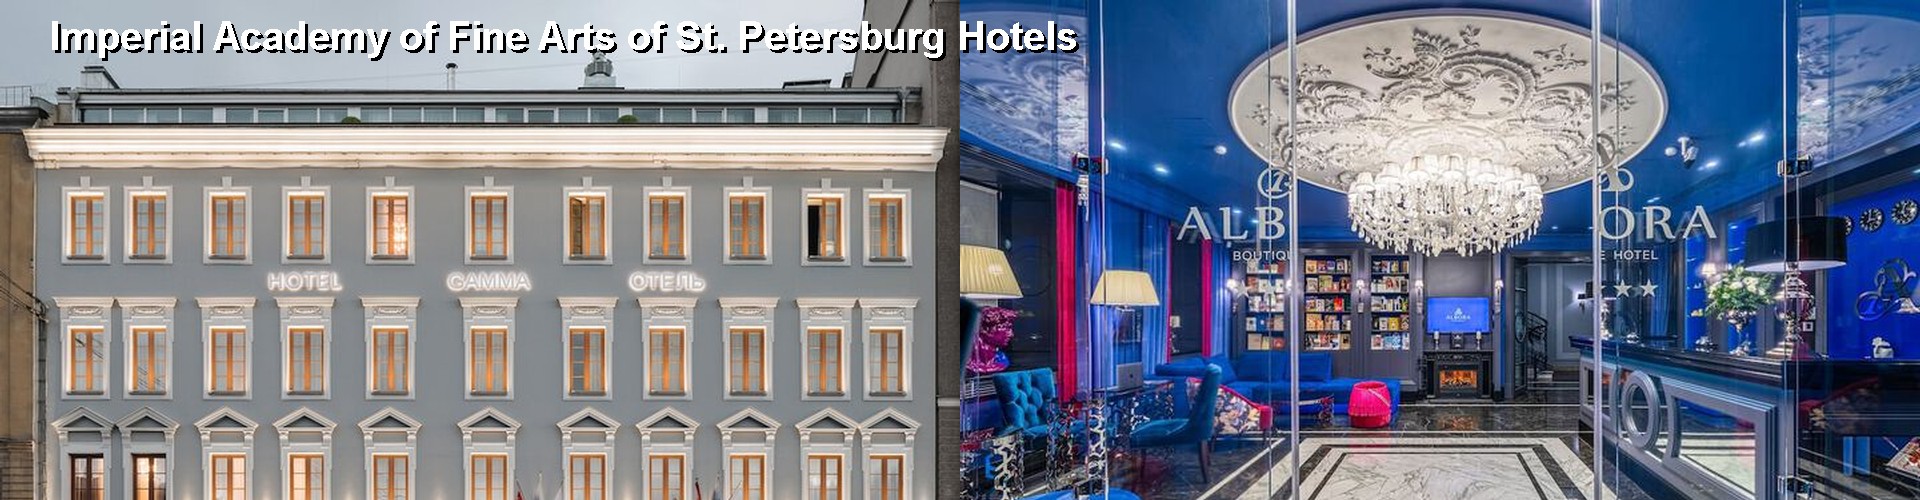 5 Best Hotels near Imperial Academy of Fine Arts of St. Petersburg